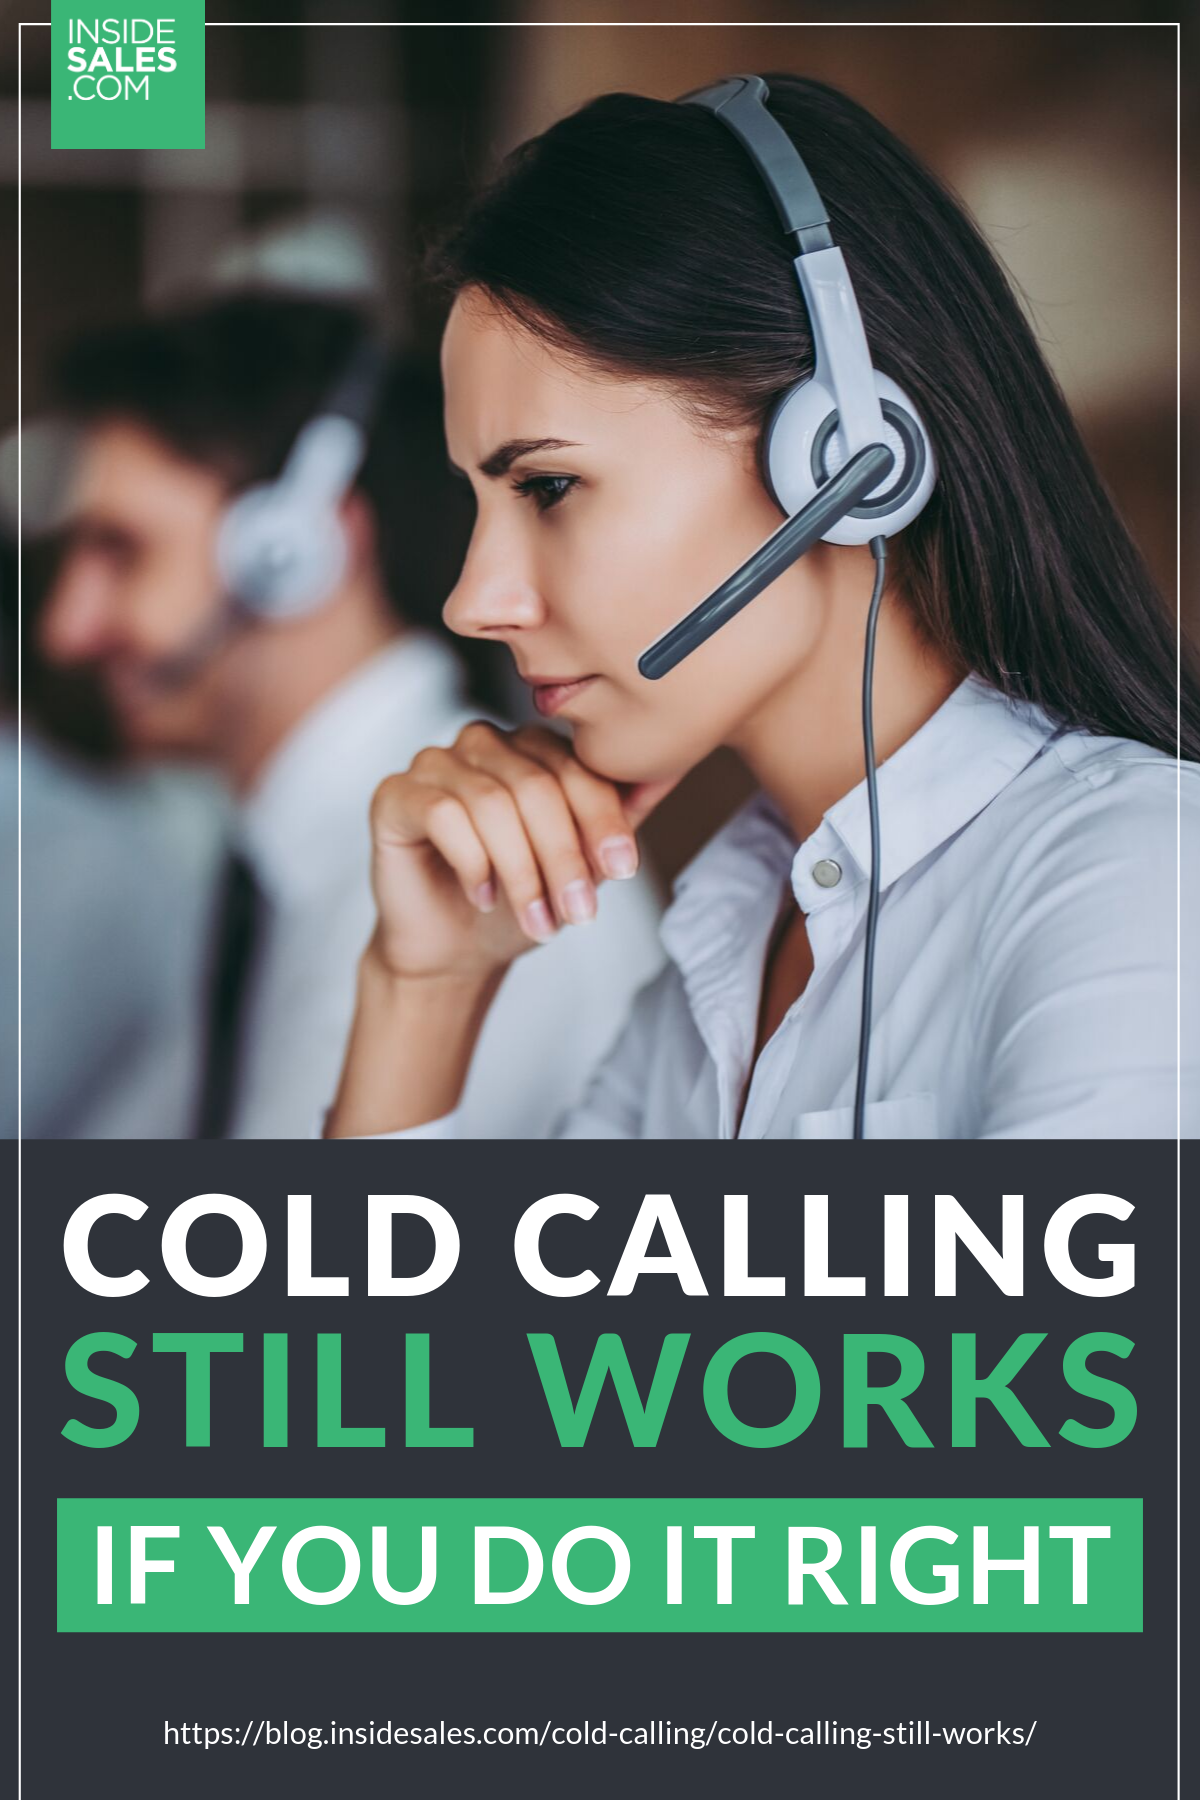 Cold Calling Still Works – If You Do It Right https://www.insidesales.com/blog/cold-calling/cold-calling-still-works/